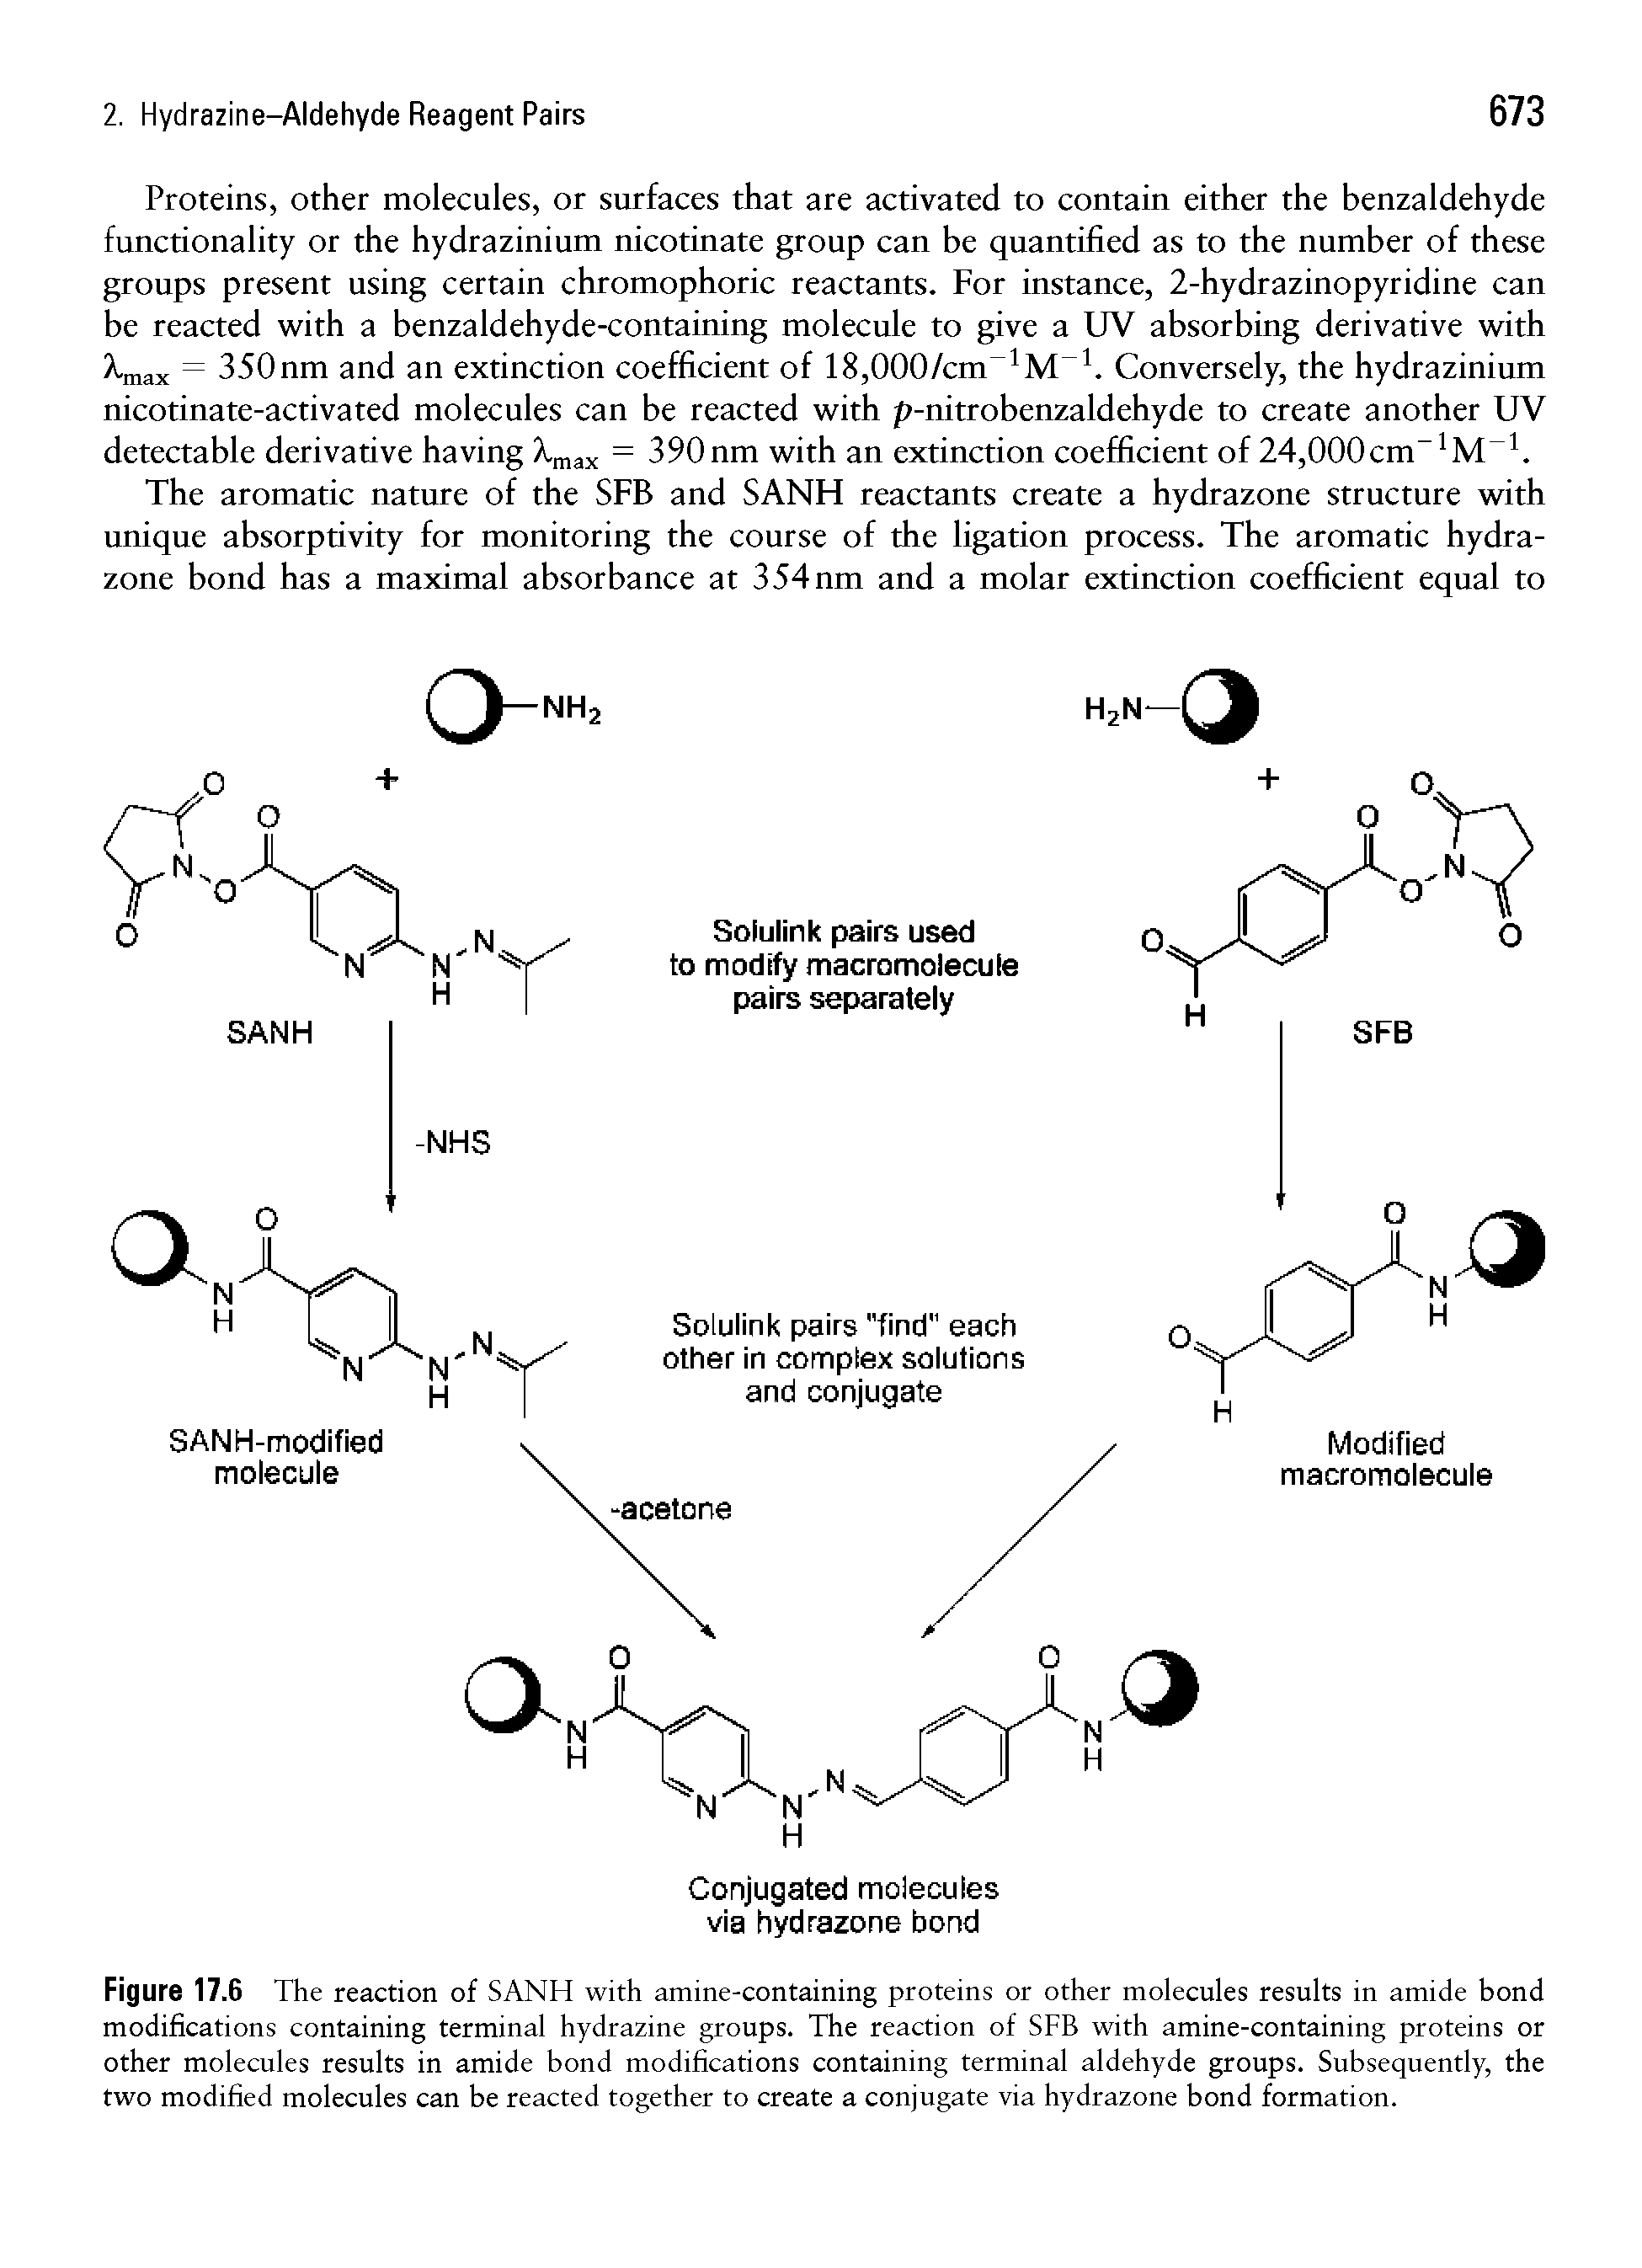 Figure 17.6 The reaction of SANH with amine-containing proteins or other molecules results in amide bond modifications containing terminal hydrazine groups. The reaction of SFB with amine-containing proteins or other molecules results in amide bond modifications containing terminal aldehyde groups. Subsequently, the two modified molecules can be reacted together to create a conjugate via hydrazone bond formation.